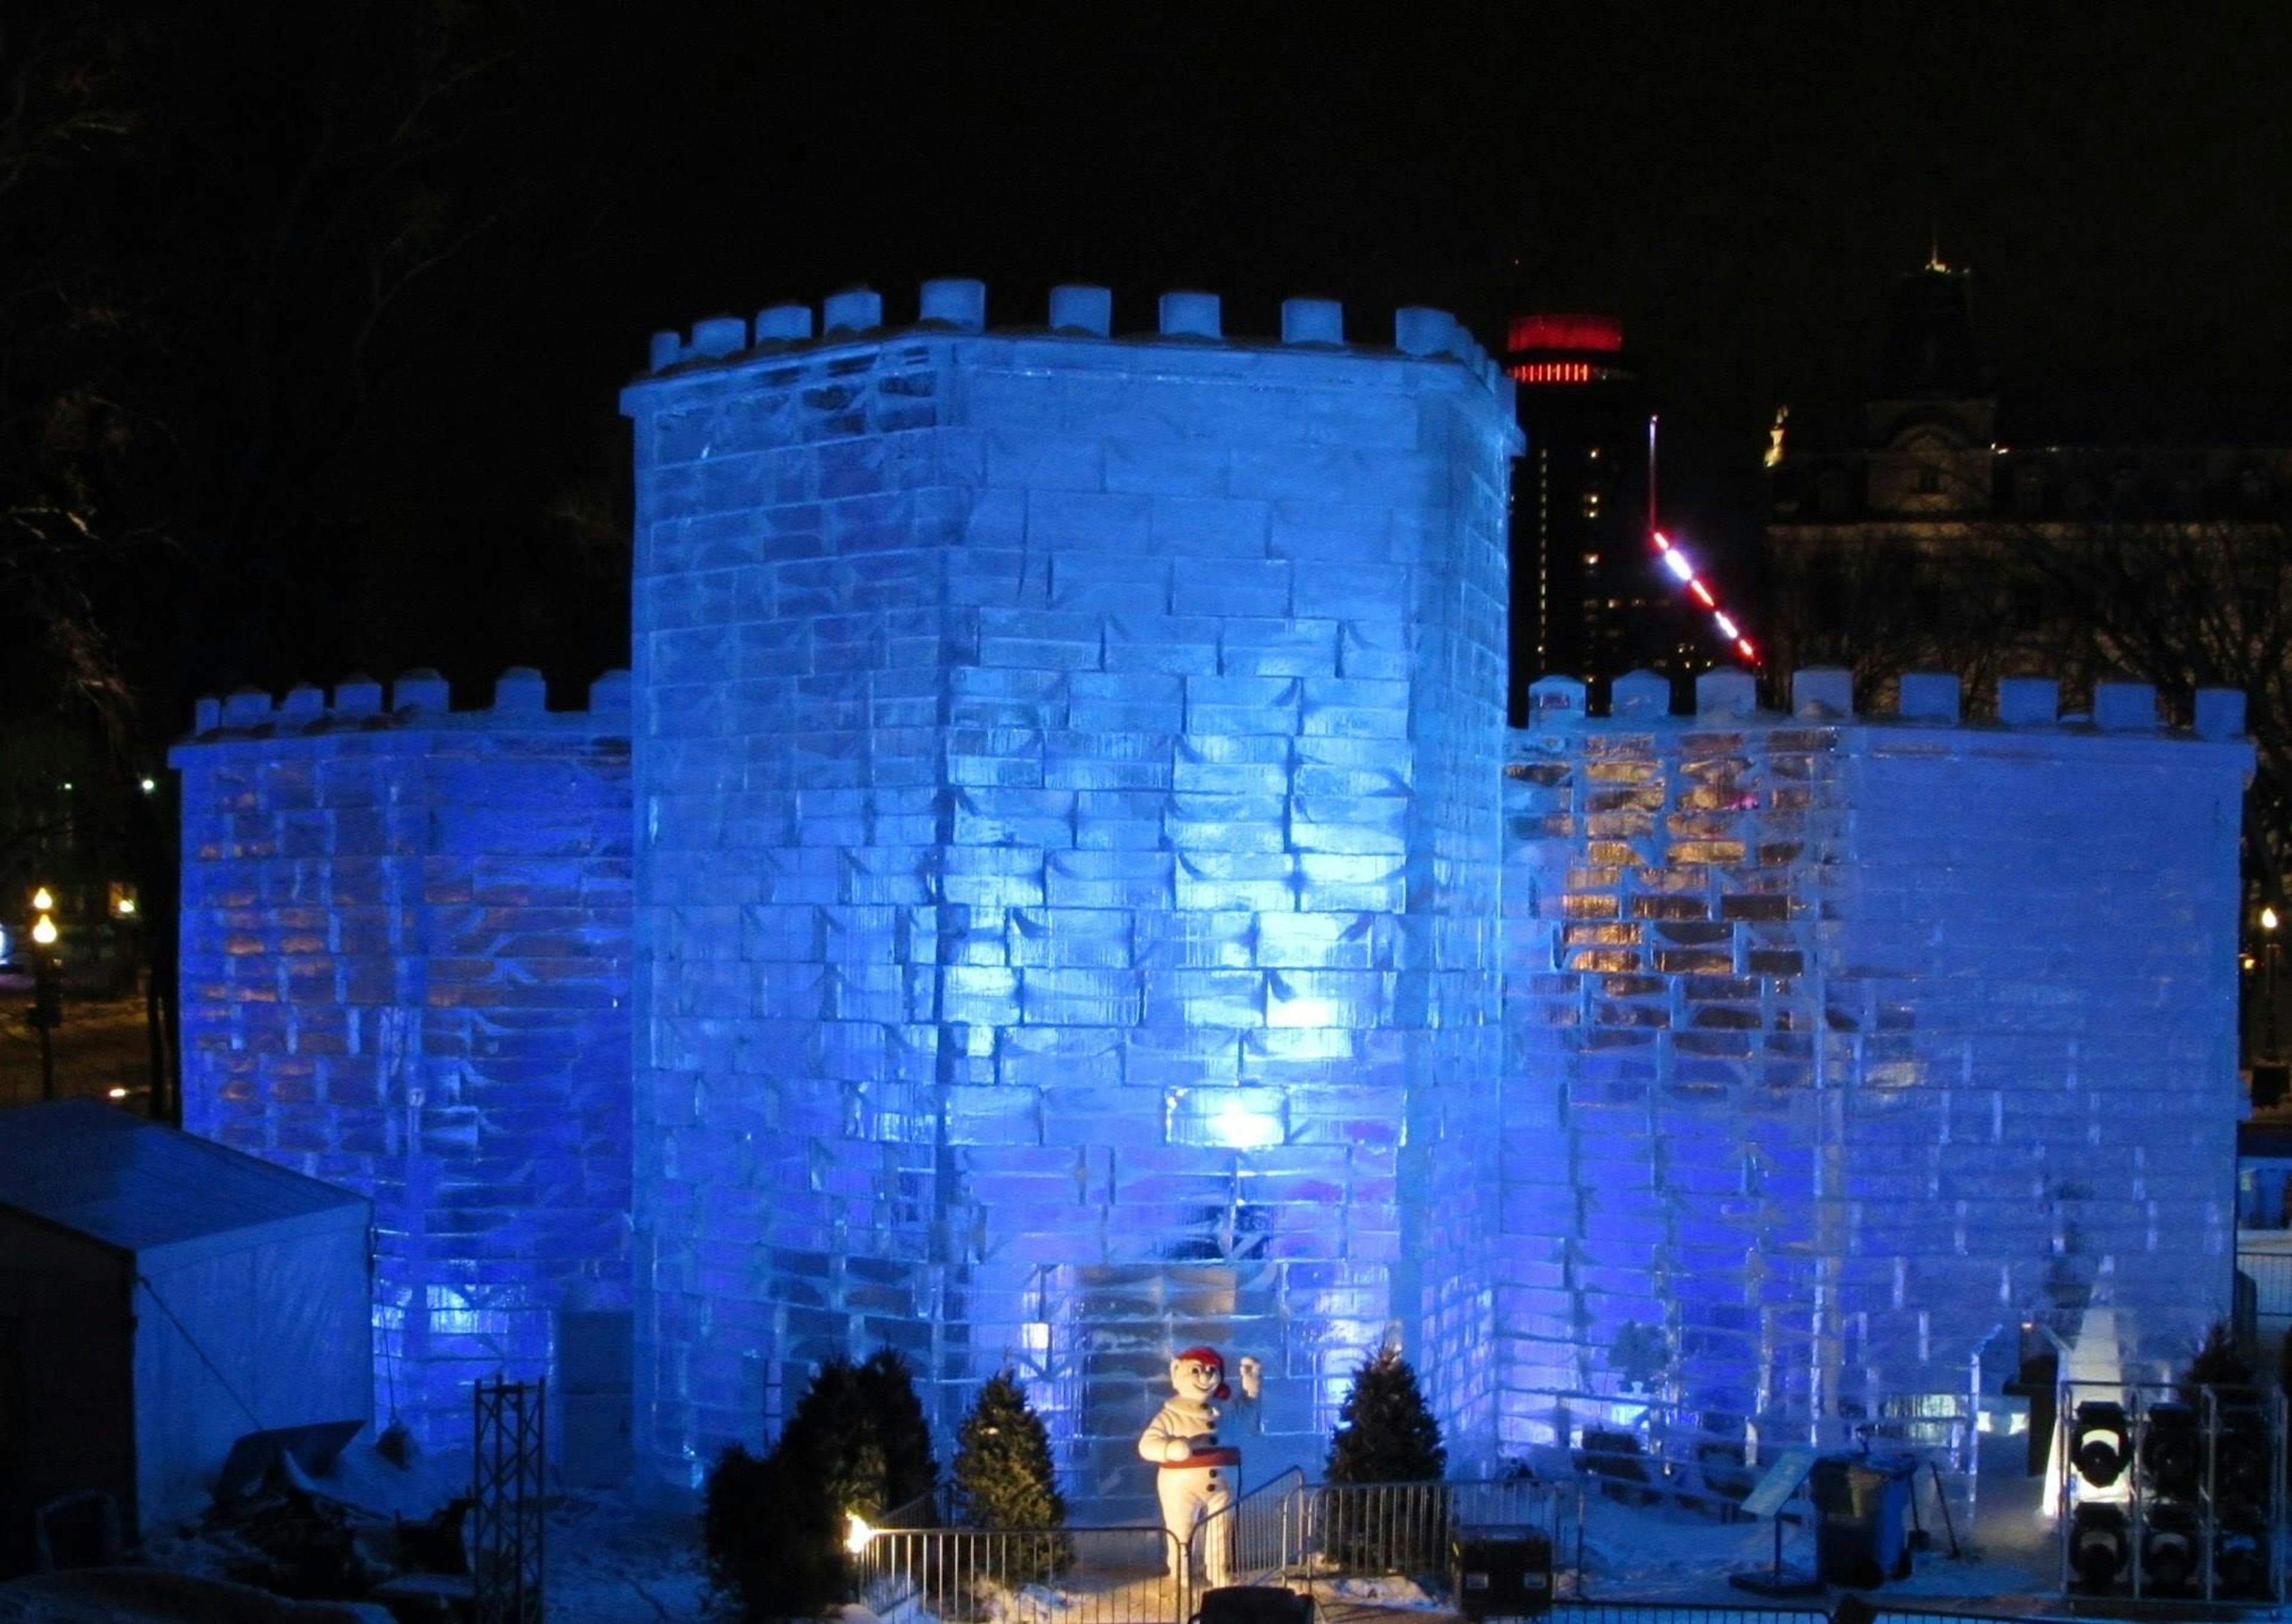 A transparent castle made of giant ice blocks is lit with a blue light from inside, against a pitch black sky.